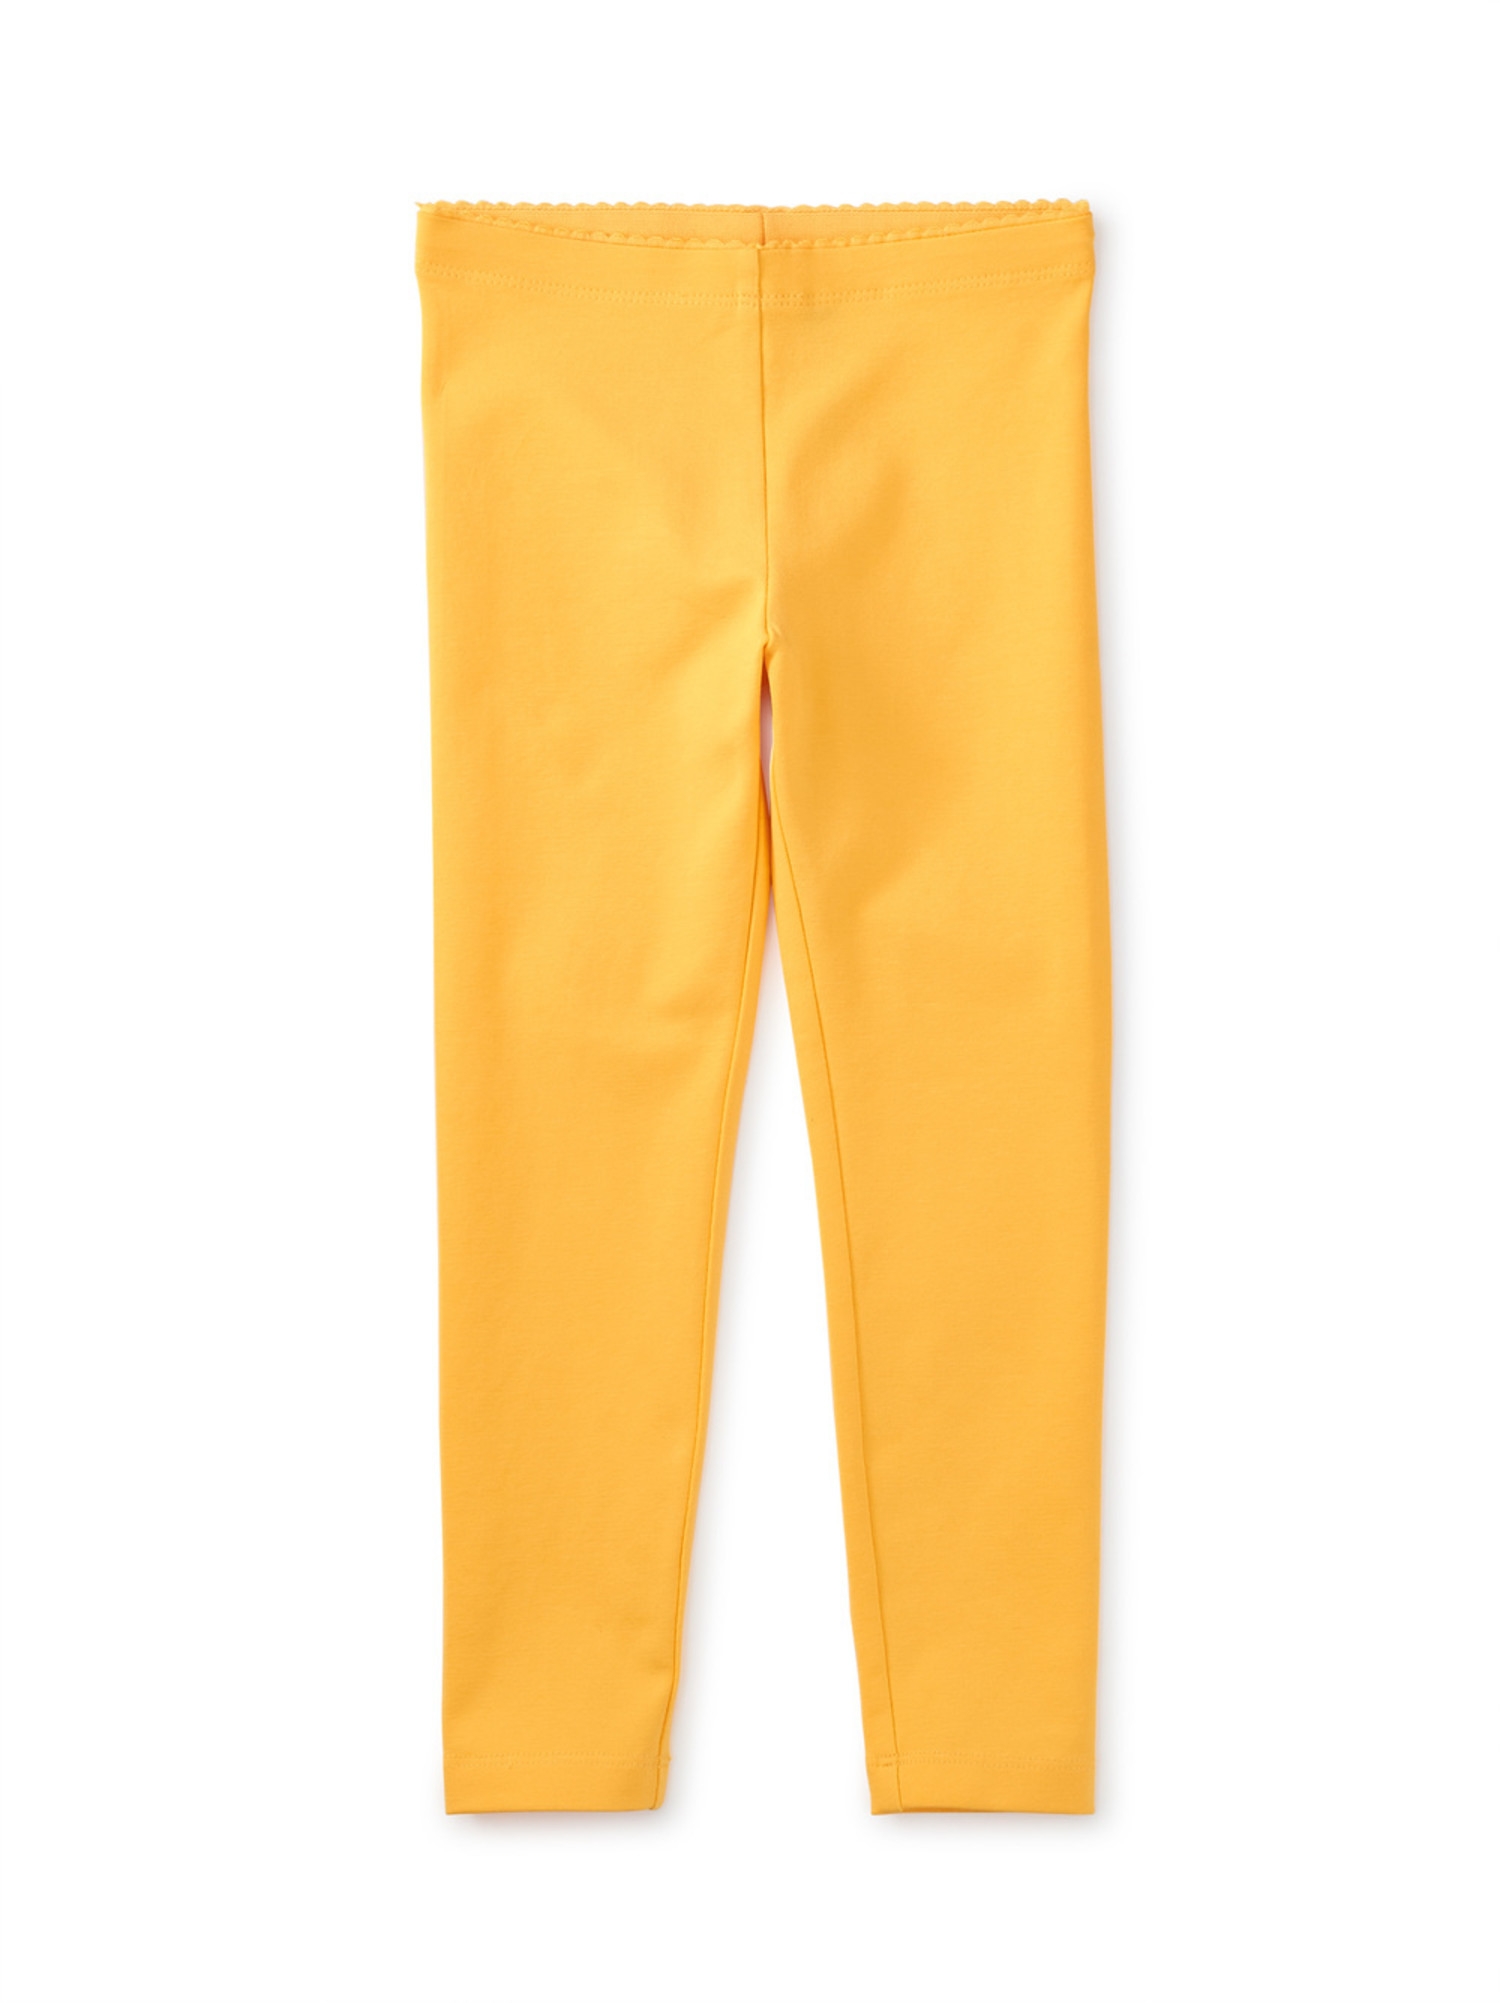 Yellow Kids White Striped Tights Style# 1273 | We Love Colors